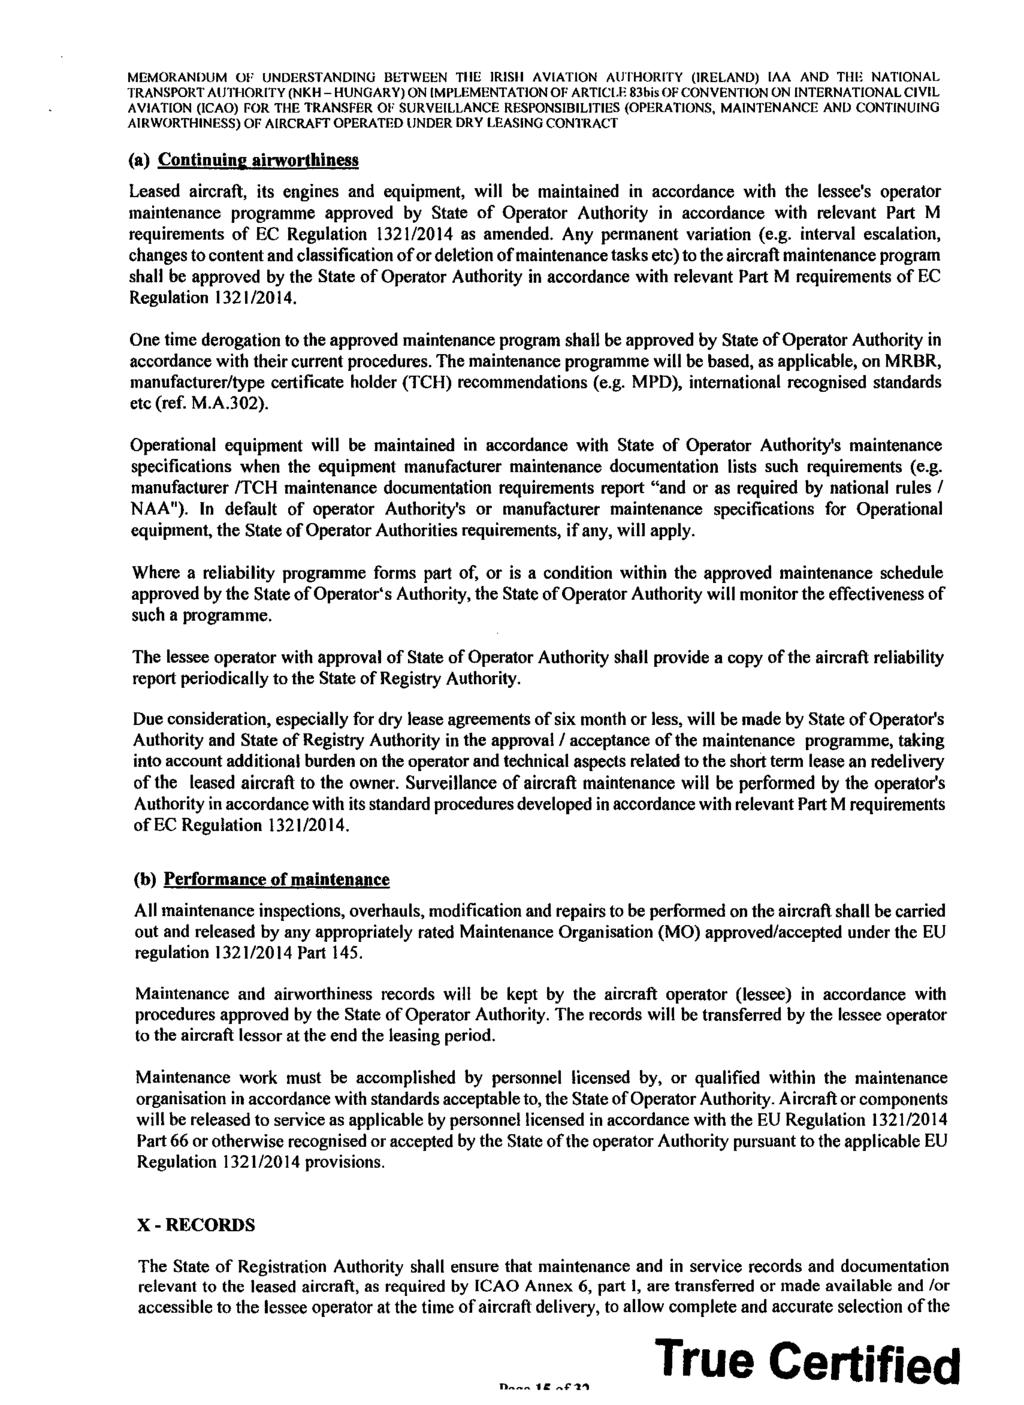 MEMORANDUM OF UNDERSTANDINU BETWEEN TilE IRISII AVIATION AUTHORITY (IRELAND) IAA AND THE NATIONAL TRANSPORT AUTHORITY (NKH- HUNGARY) ON IMPLEMENTATION OF ARTICLE 83bis OF CONVENTION ON INTERNATIONAL